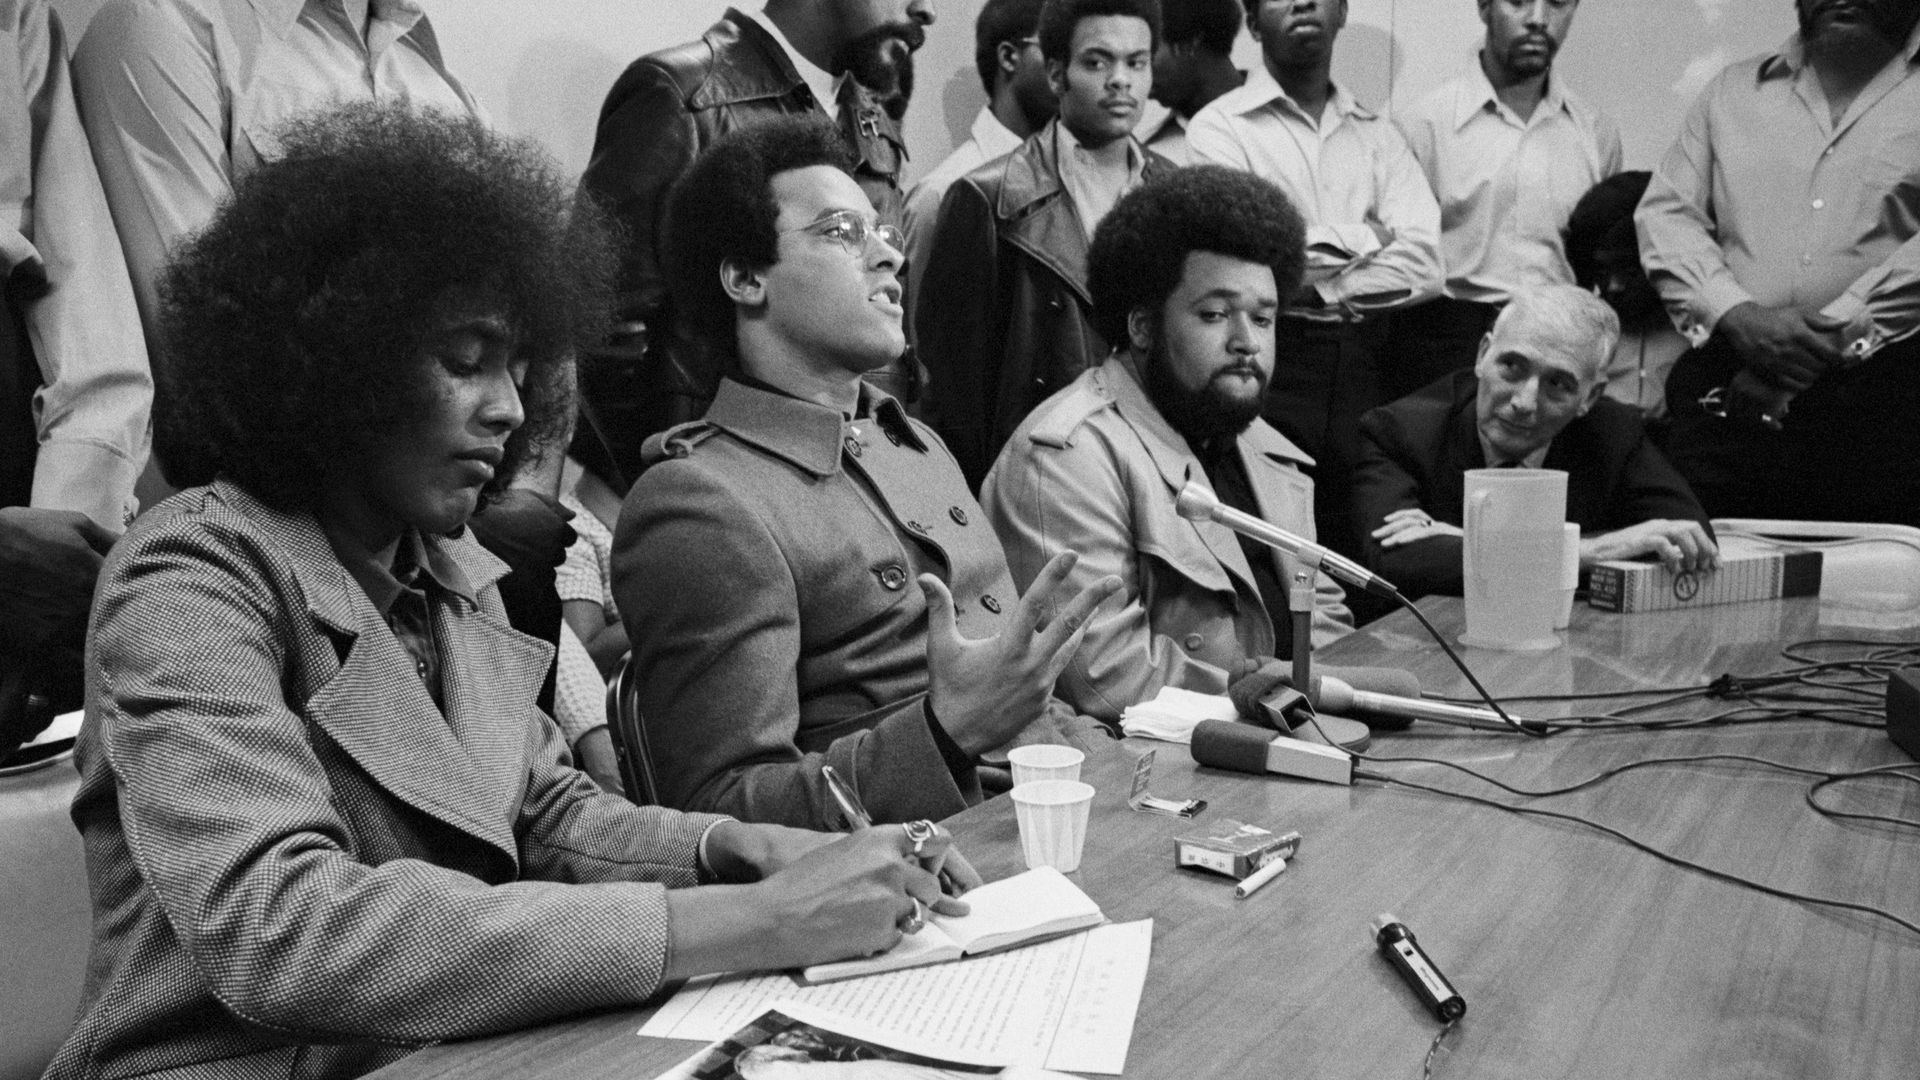 Black Panther Party leader Huey P. Newton holds a press conference on his return from China where he met with Chinese leader Zhou Enlai.